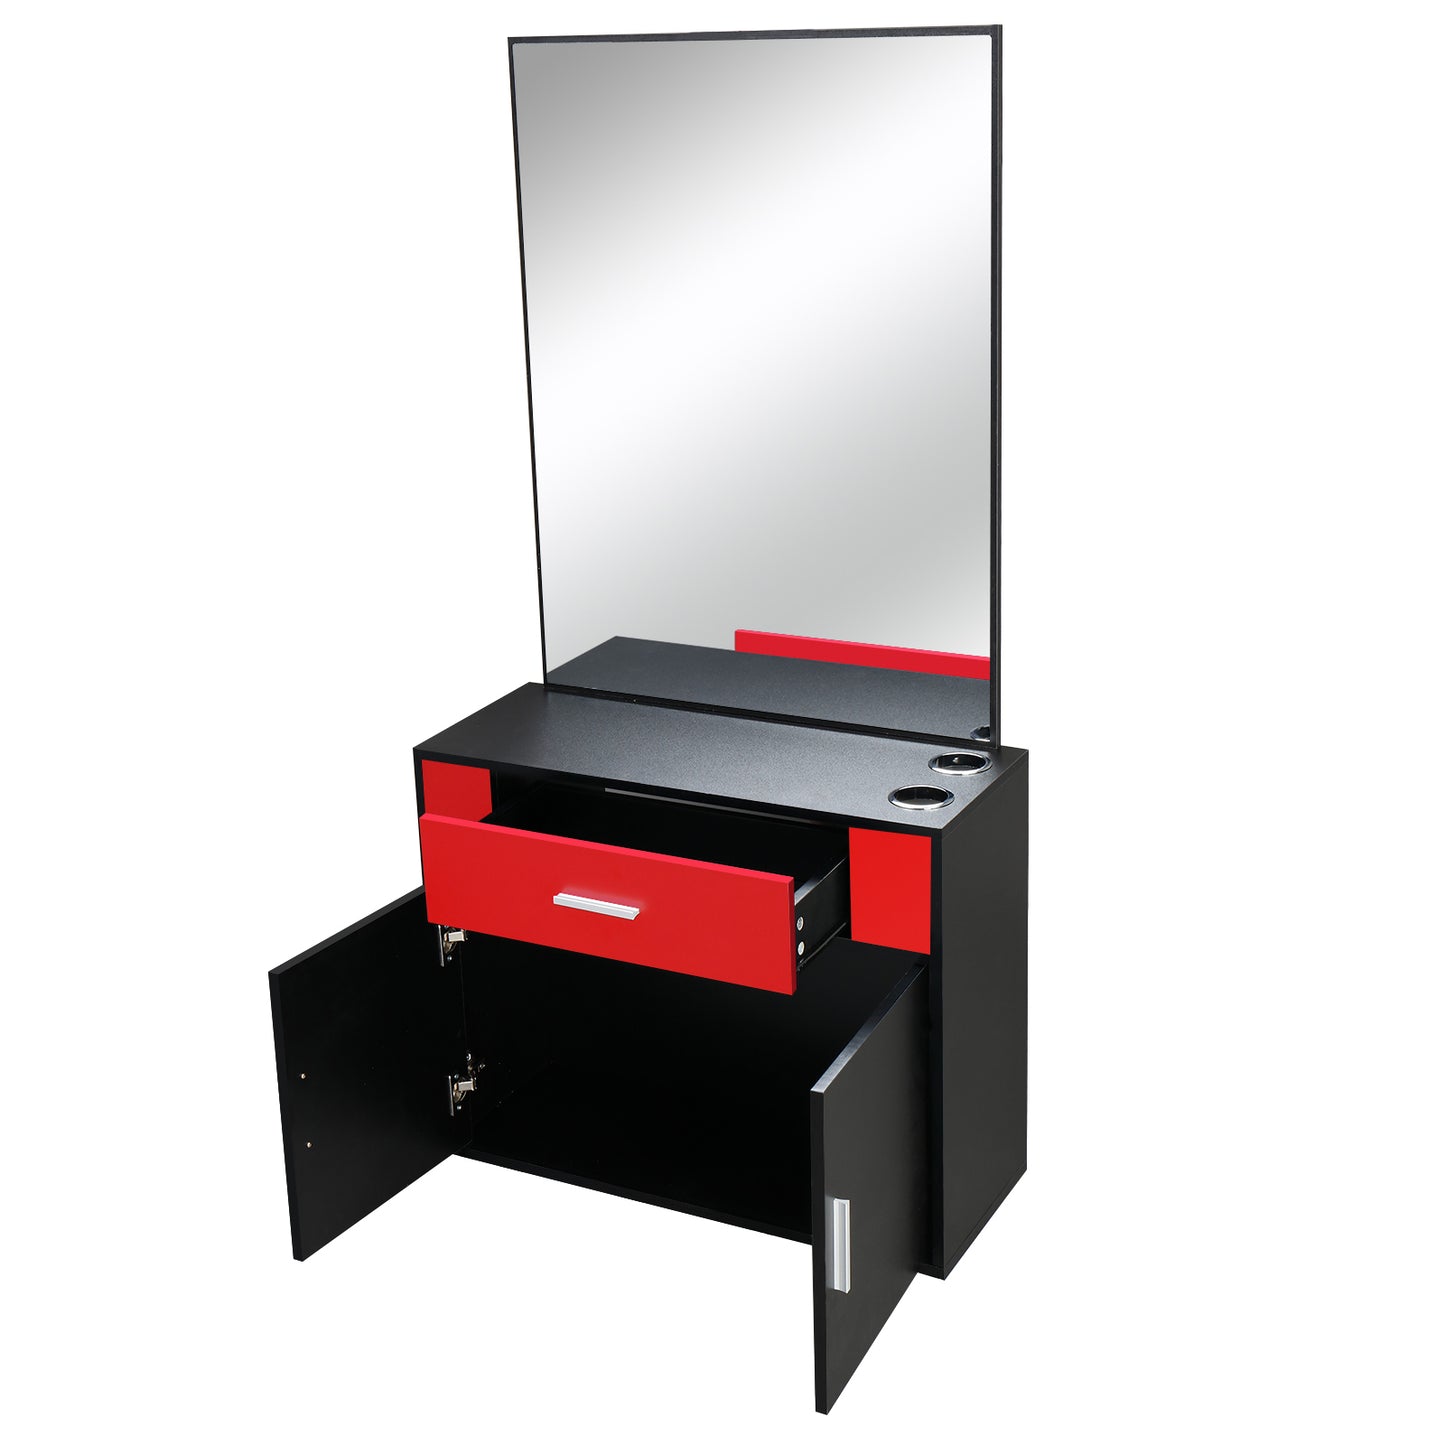 Chipboard linen top 1 drawer 1 door with mirror Salon cabinet black and red